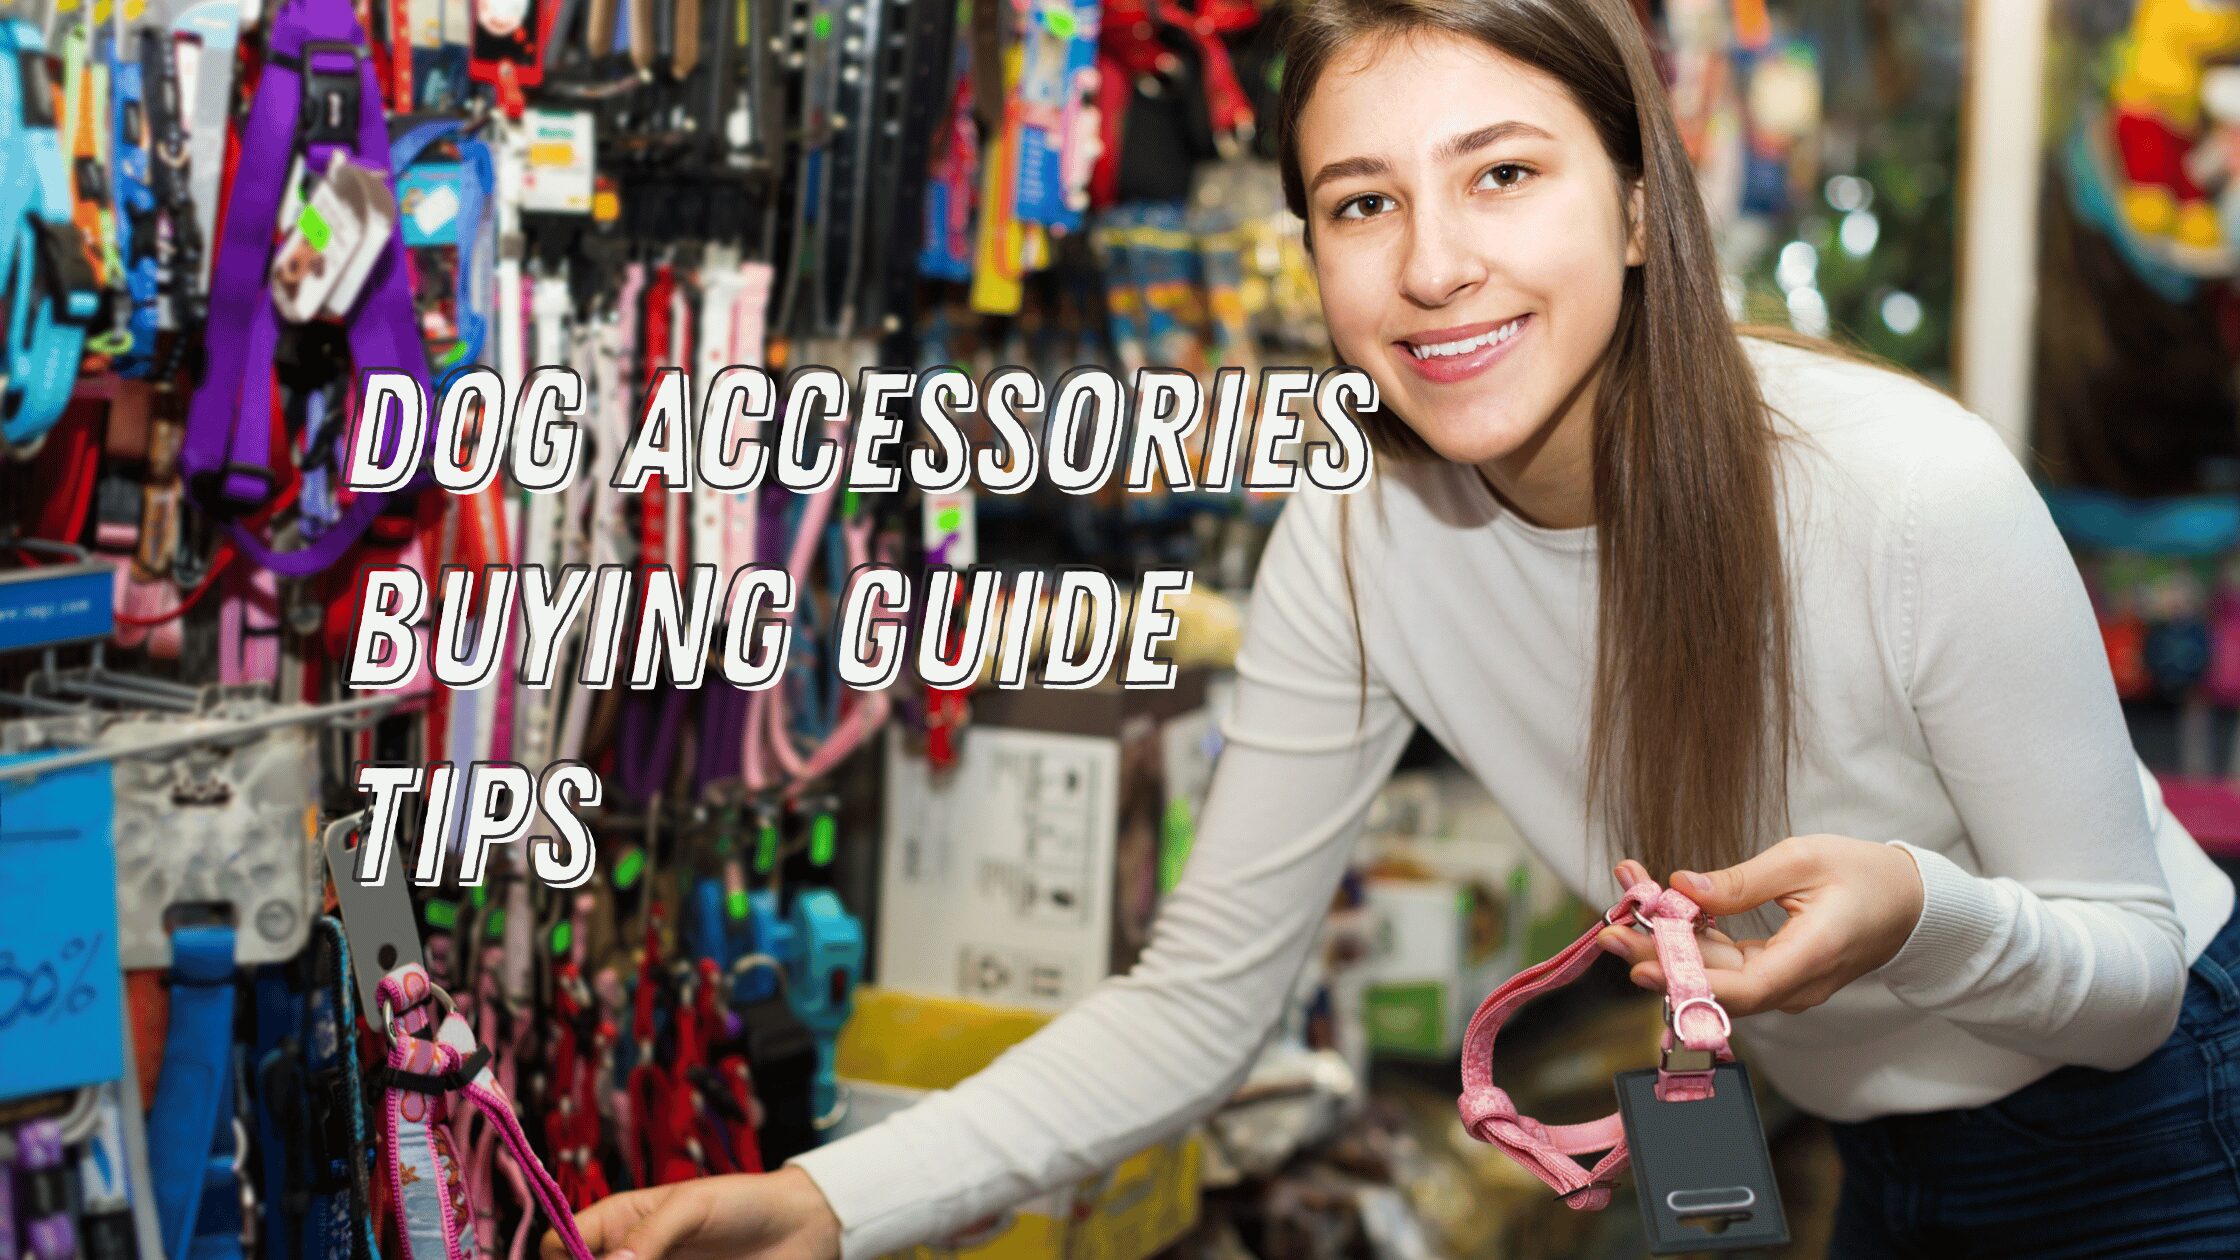 Dog Accessories Buying Guide Tips